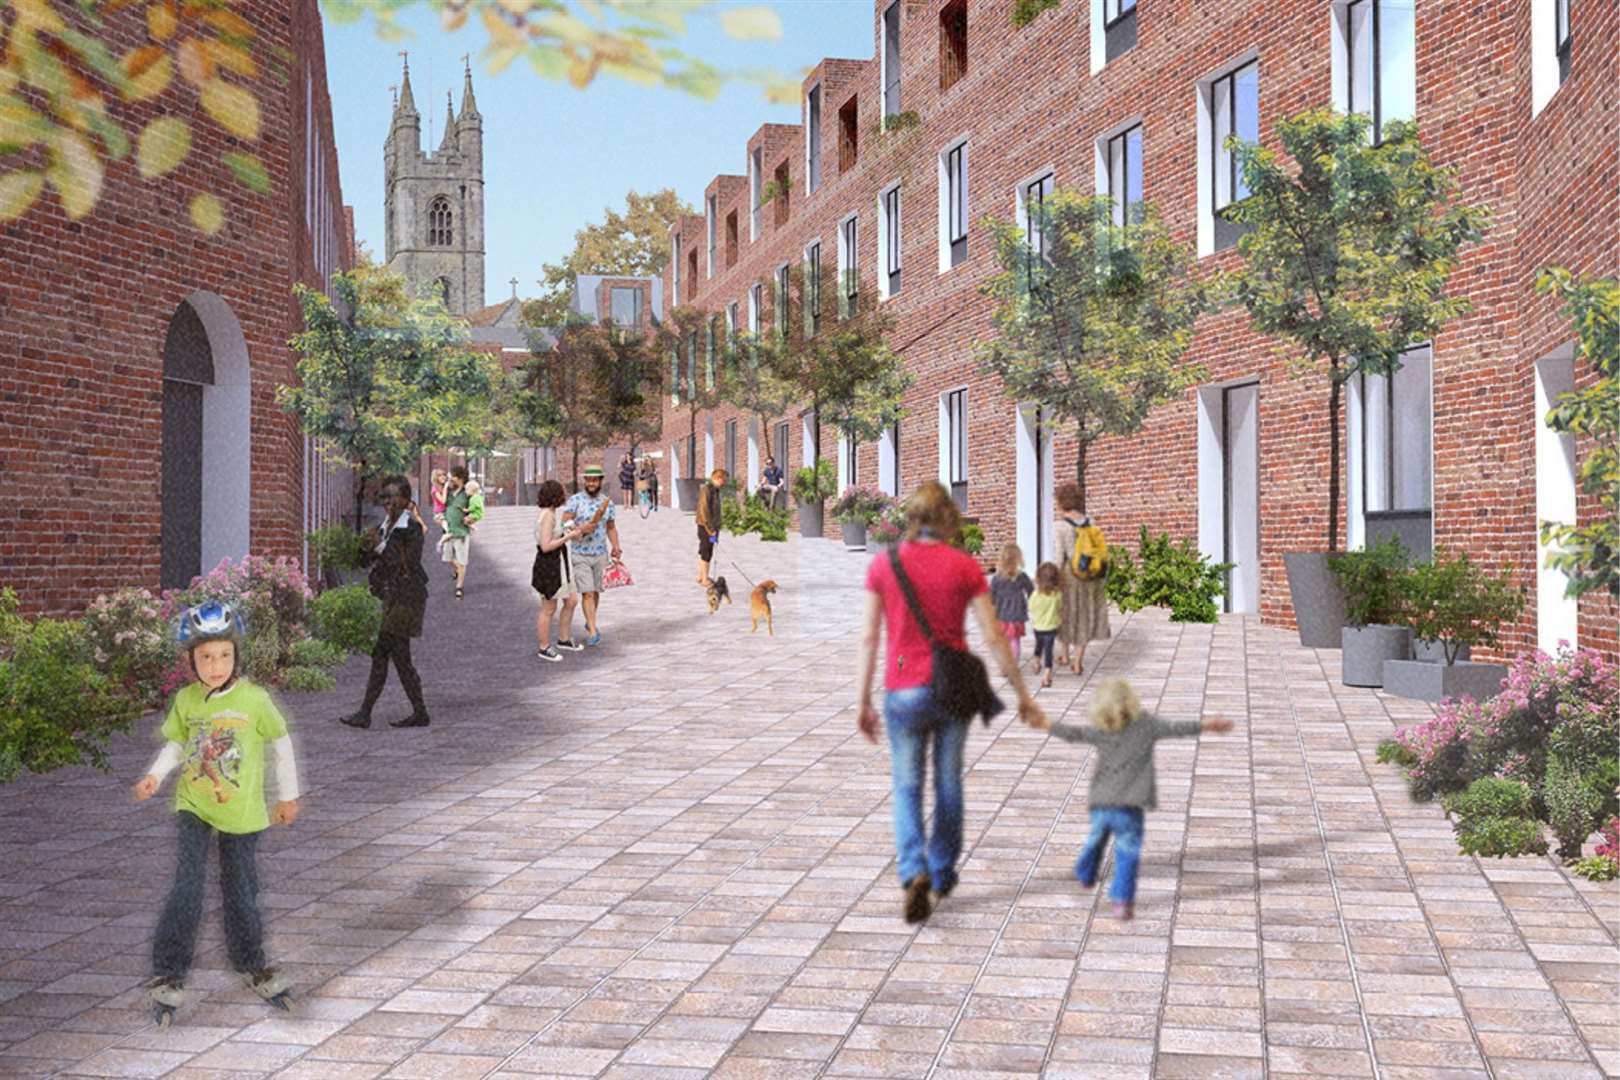 The St Mary's Fields development will include 230 homes. Photo: Ashford Borough Council